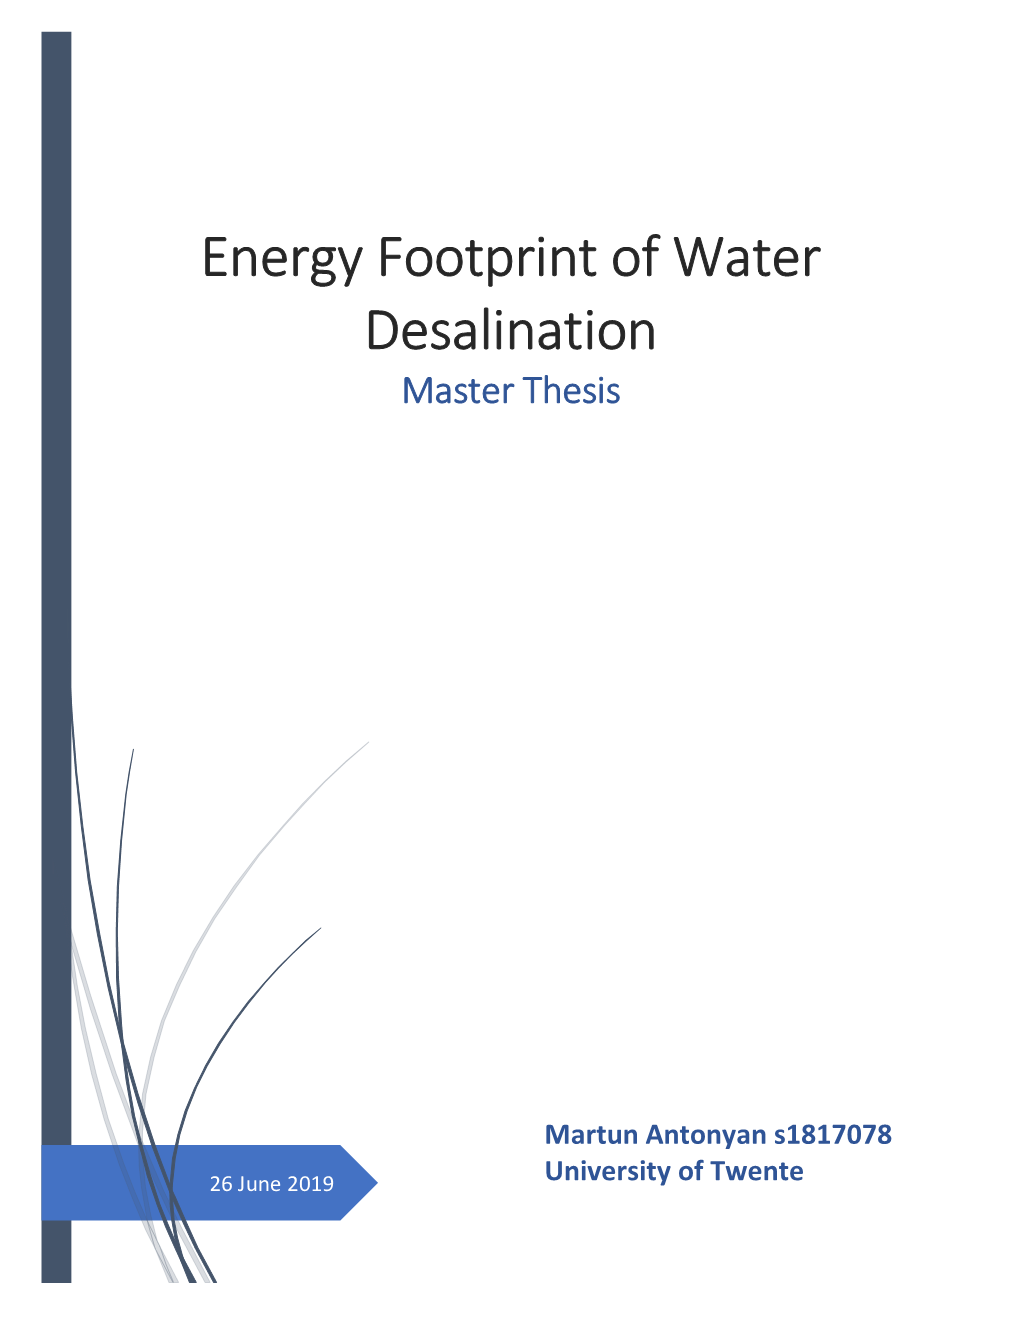 Energy Footprint of Water Desalination Master Thesis